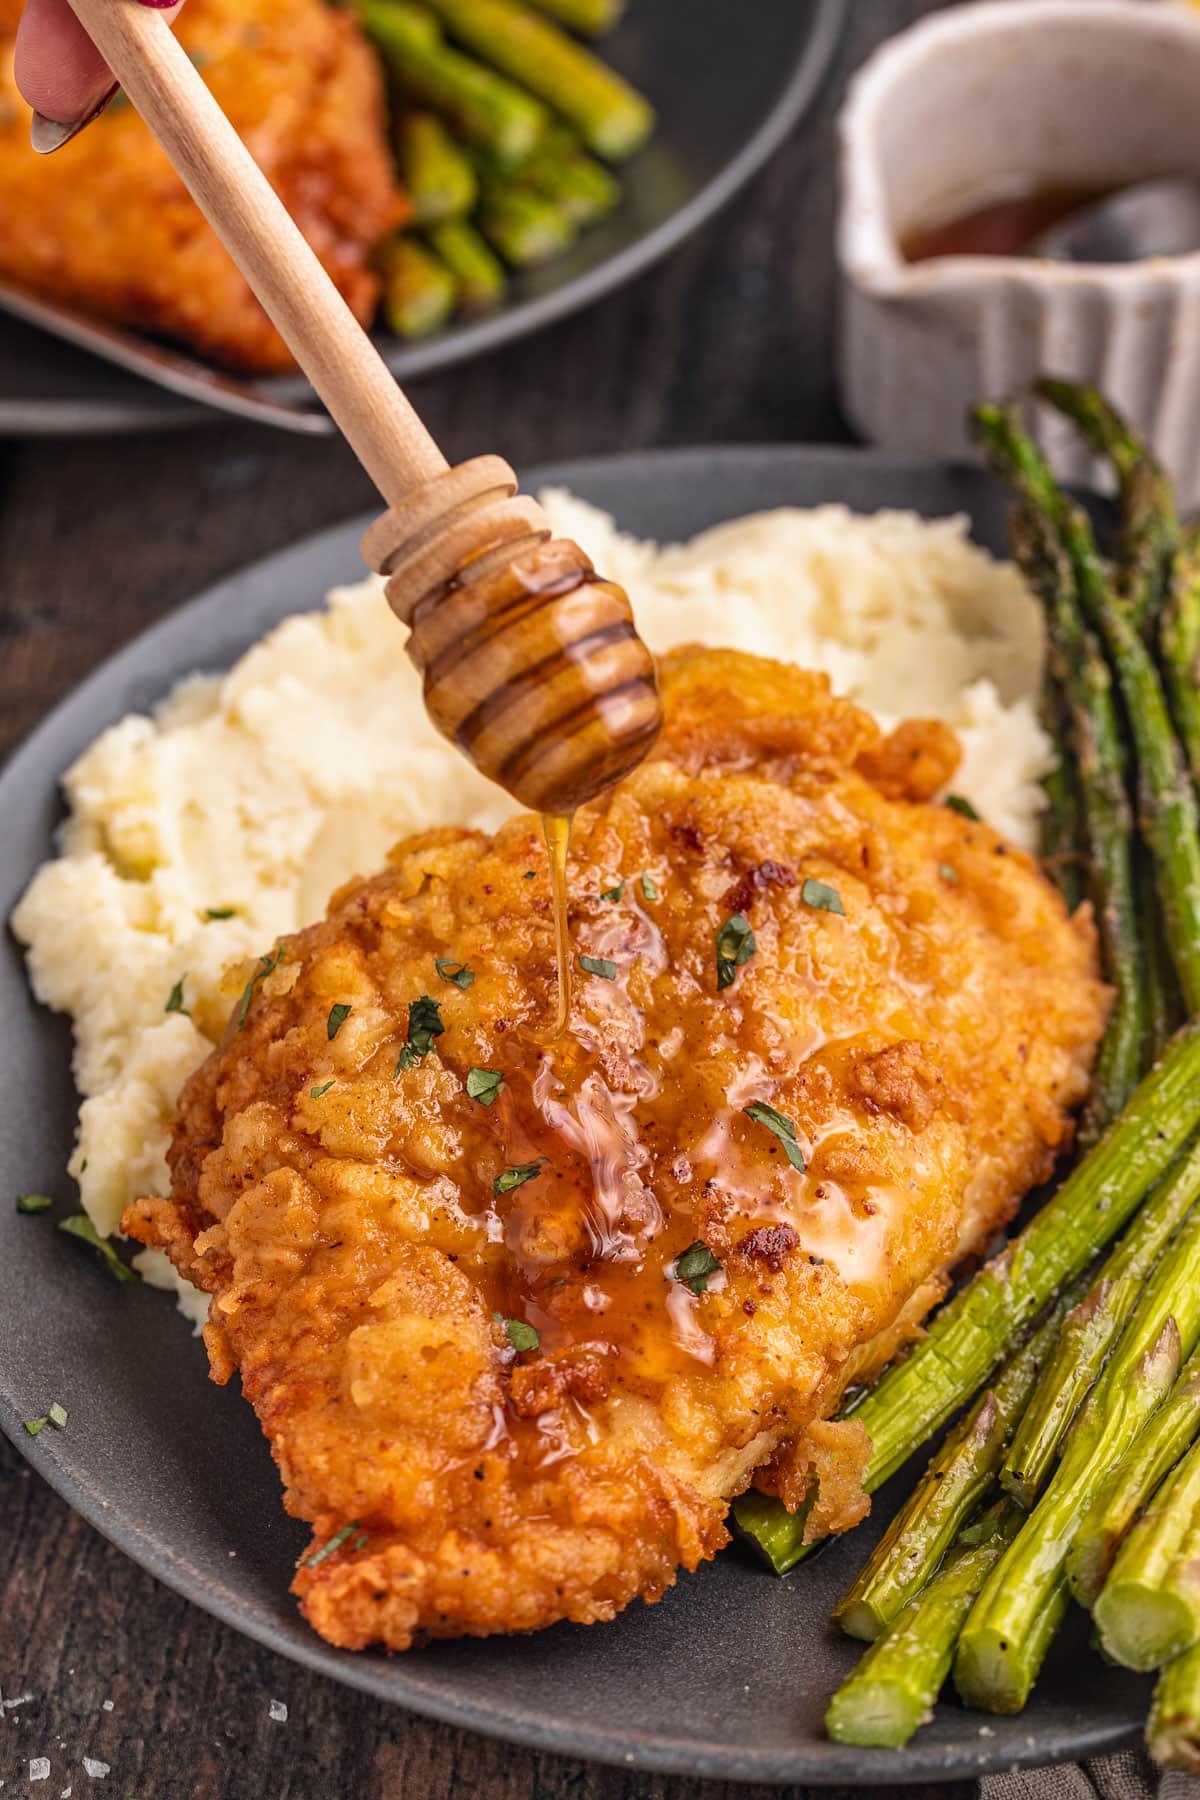 Crispy breaded chicken breast being drizzled with truffle honey on a plate next to asparagus and mashed potatoes.